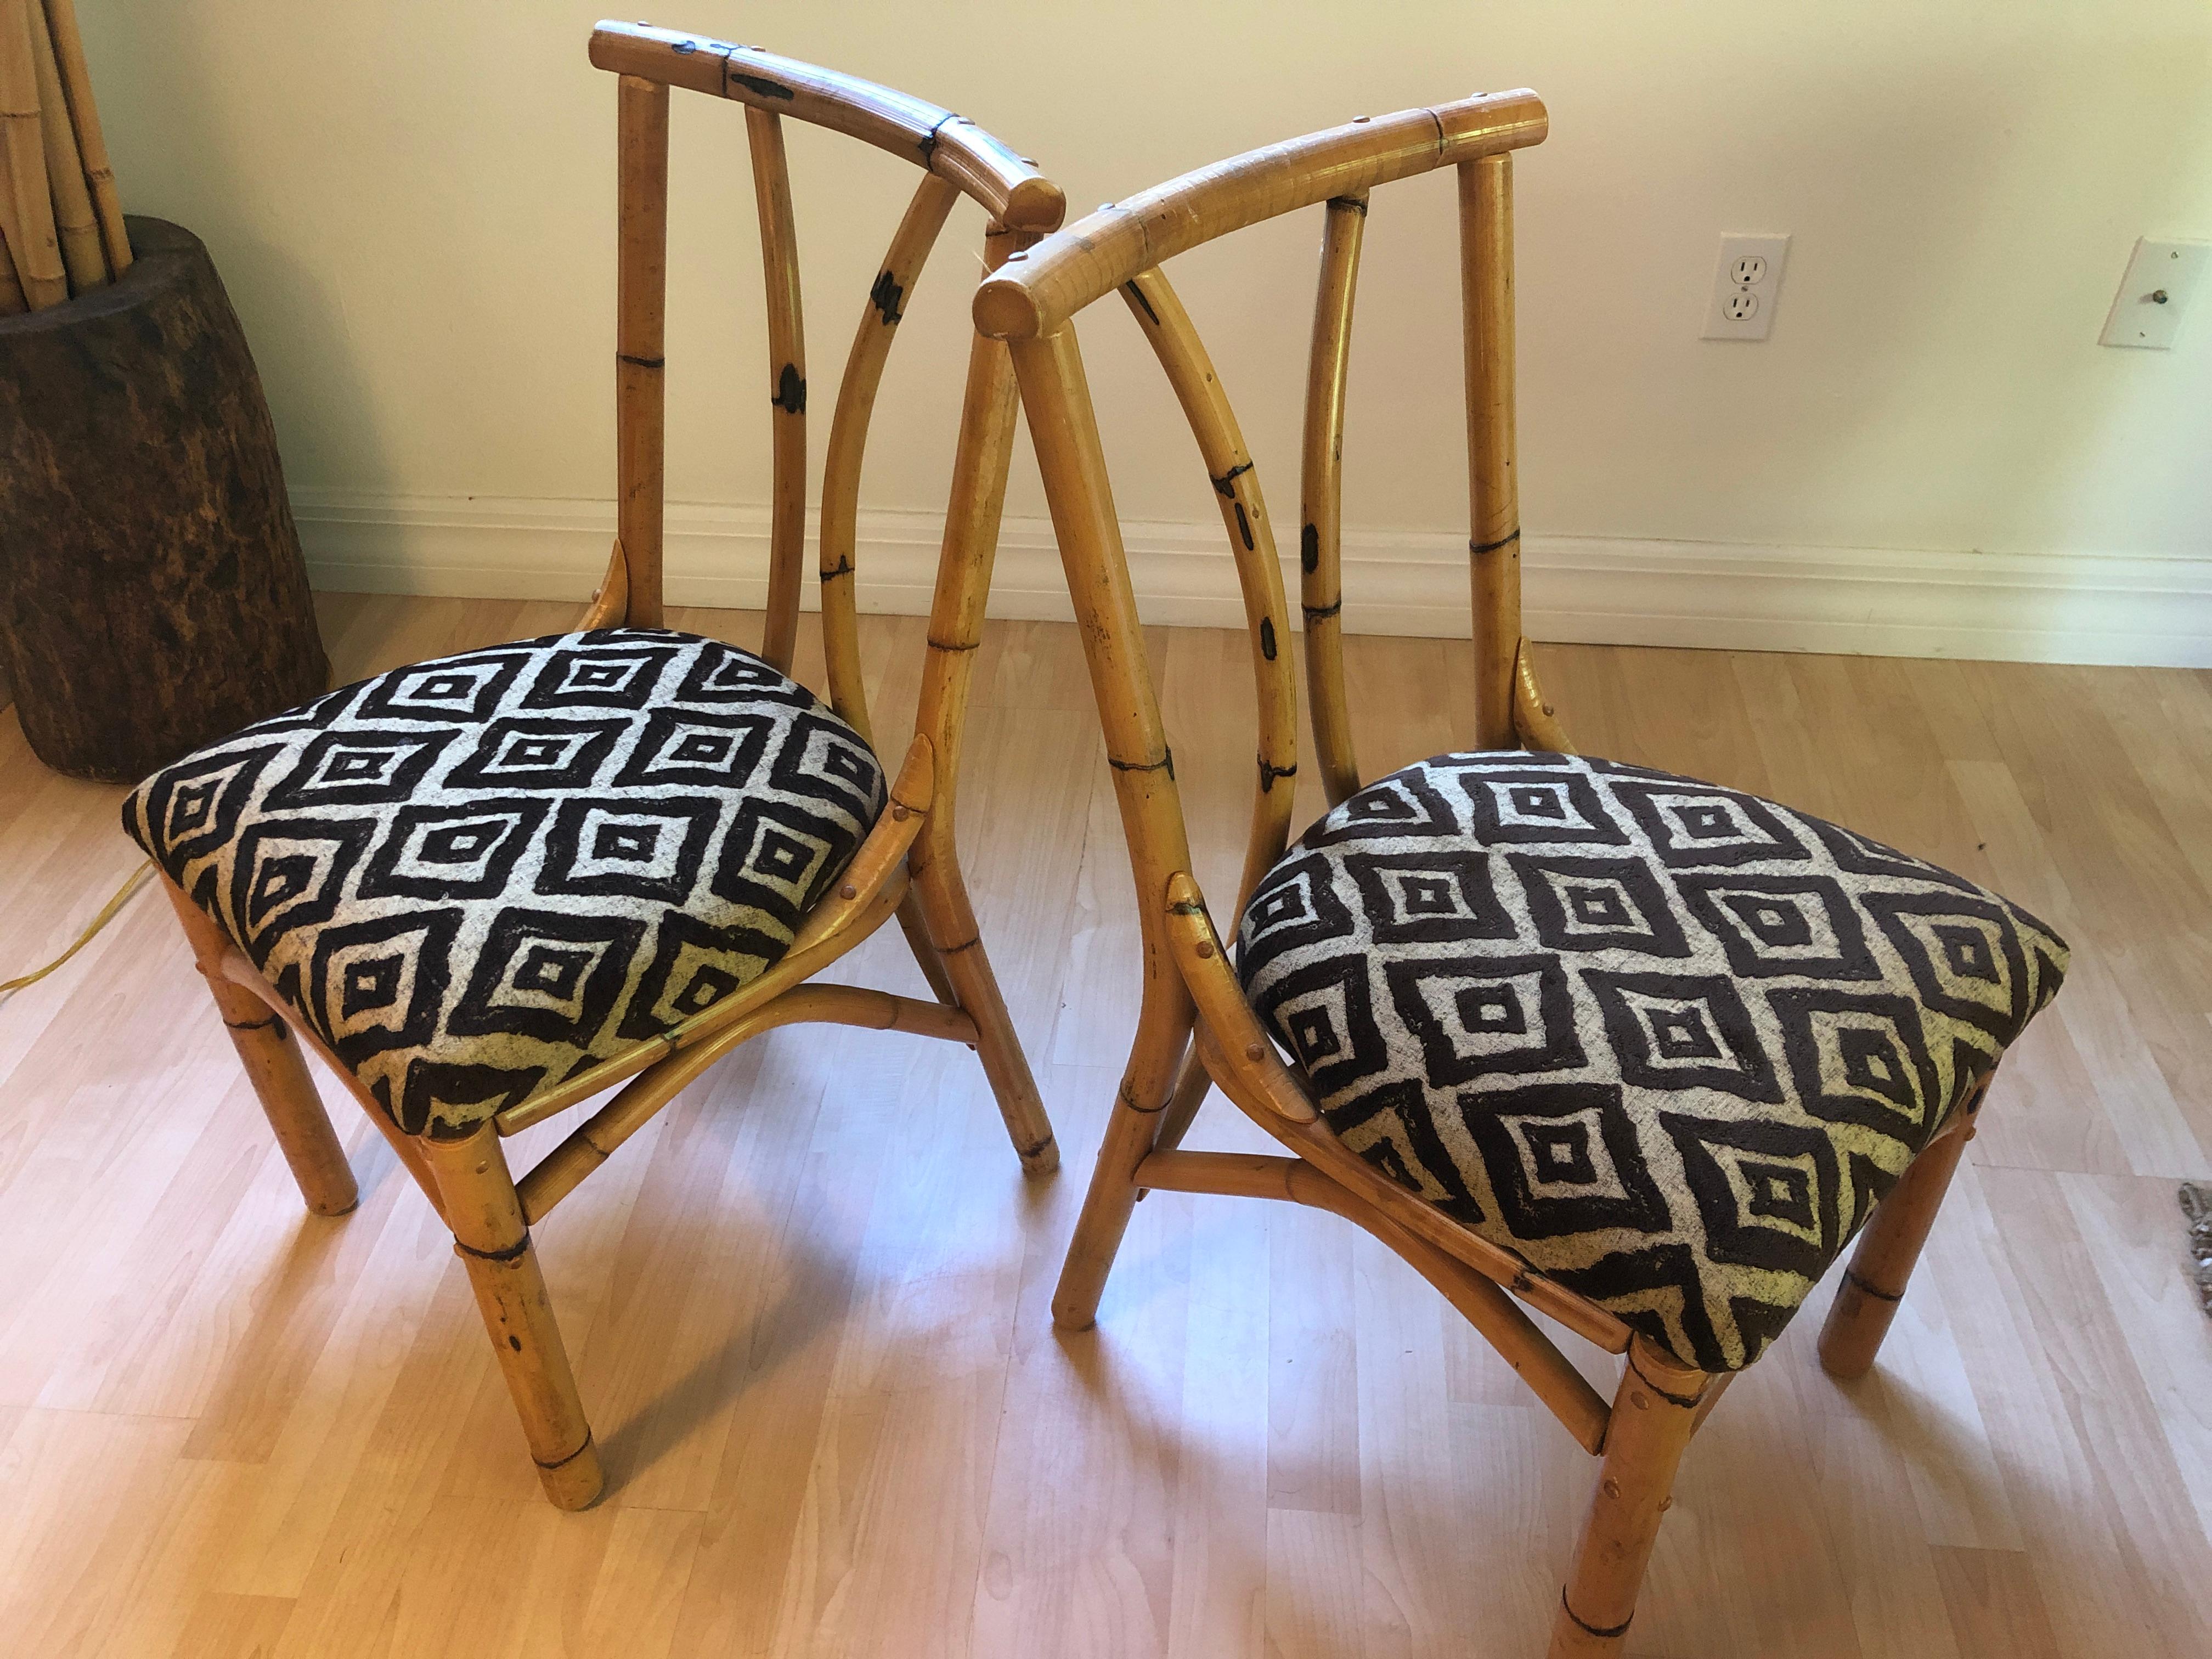 A pair of very unusual antique polynesian hand made chairs. These were made by an old technique using wrapped leaves. Not your typical mass manifactured bamboo , these have an old authentic polynesian bamboo feel that is uncommon. A lovey authentic